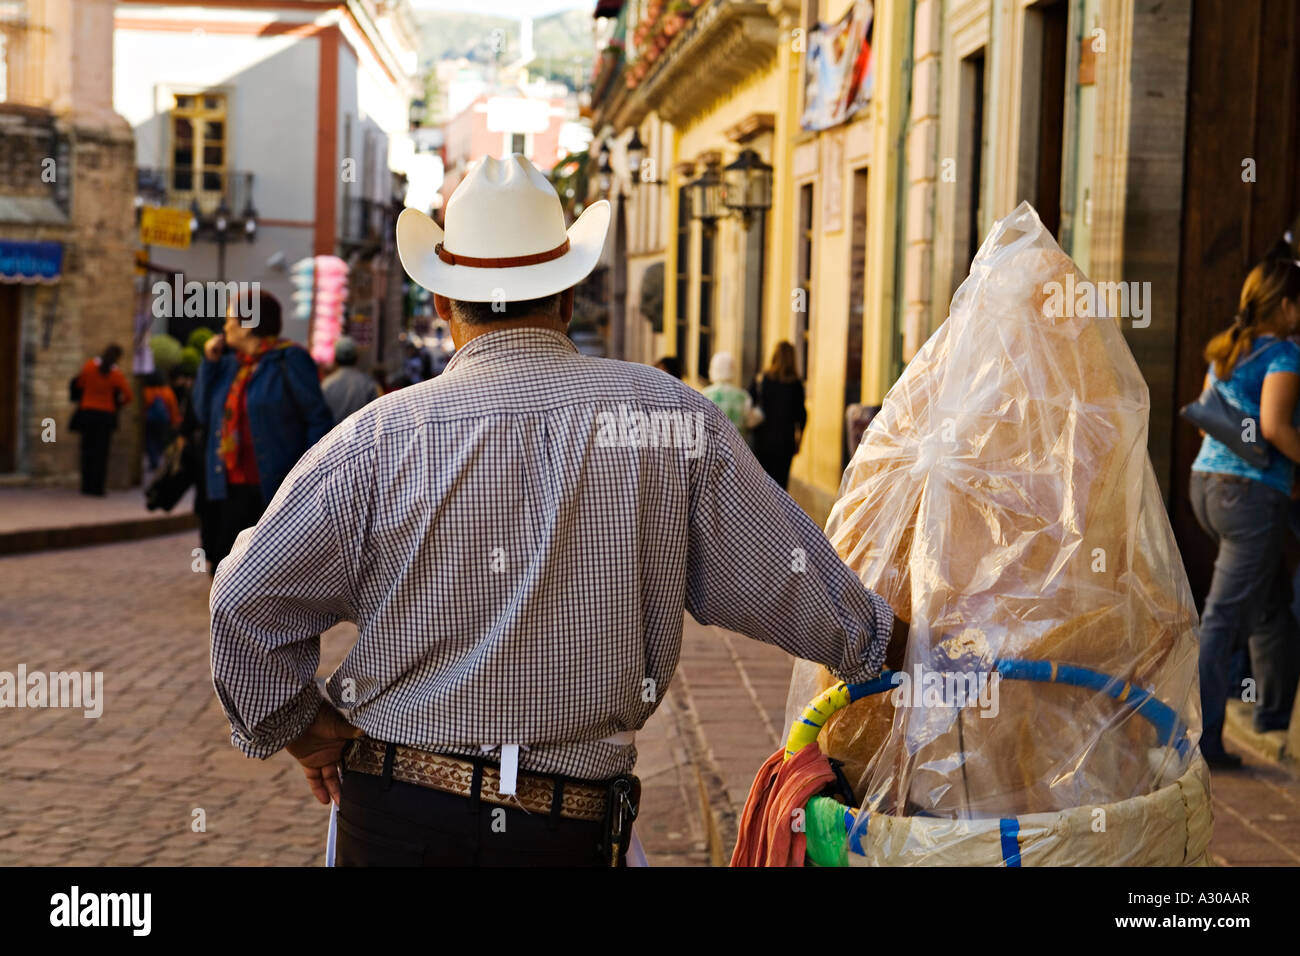 MEXICO Guanajuato Mexican man wearing cowboy hat stand next to large churro, busy city pedestrian area Stock Photo